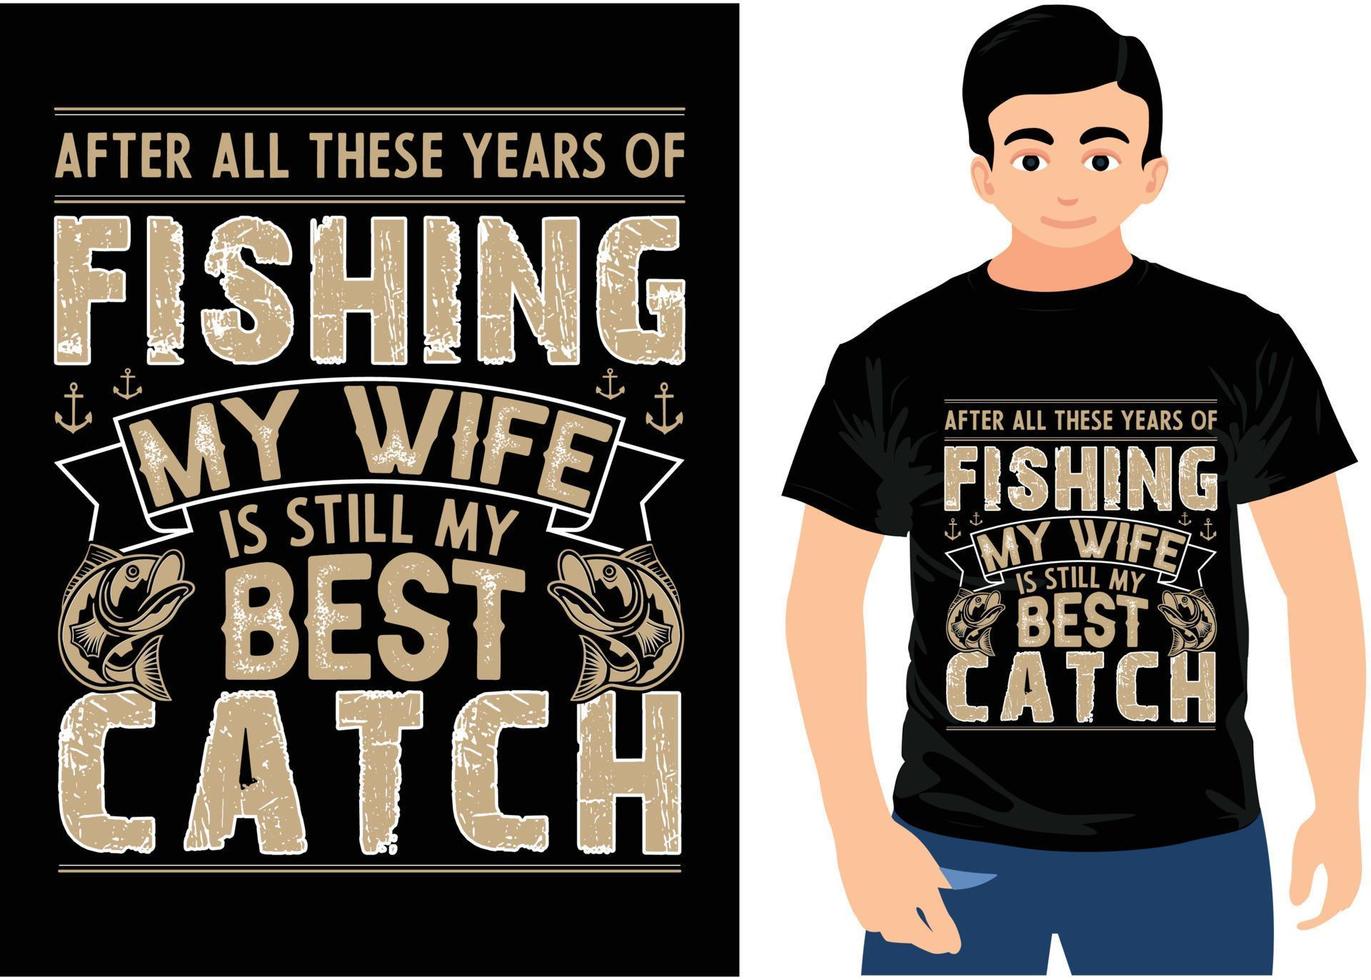 After All These Years Of Fishing My Wife Is Still My Best Catch. Fishing T-shirt Design. vector